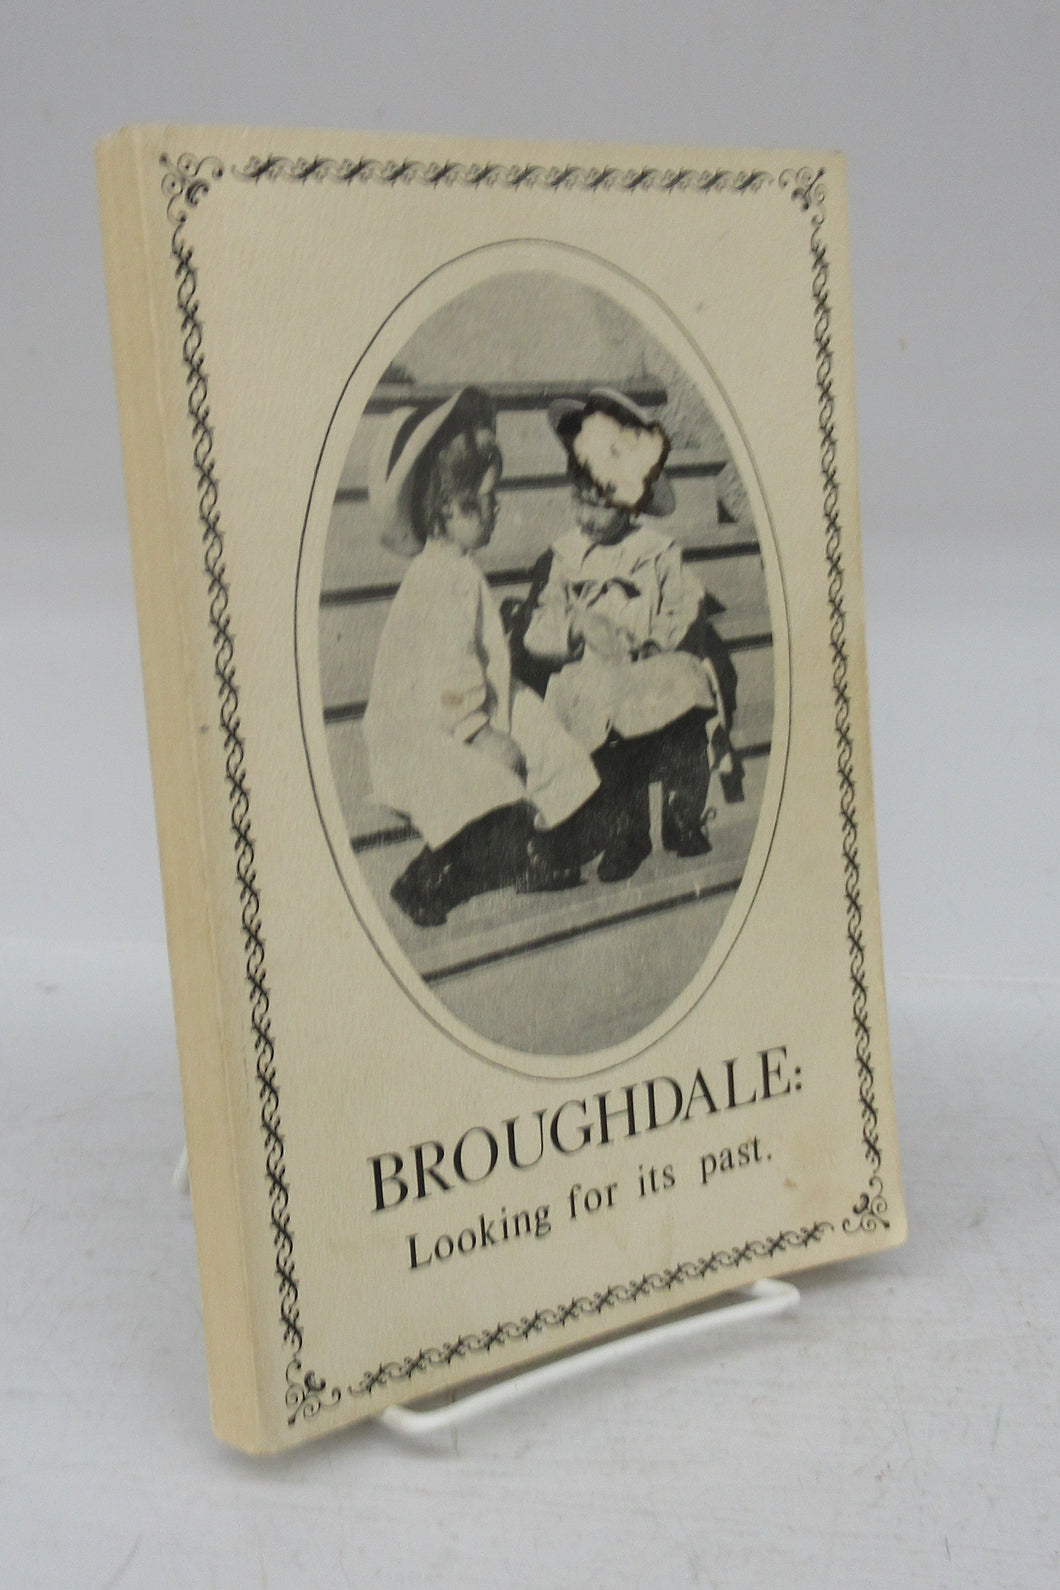 Broughdale: Looking for its past.